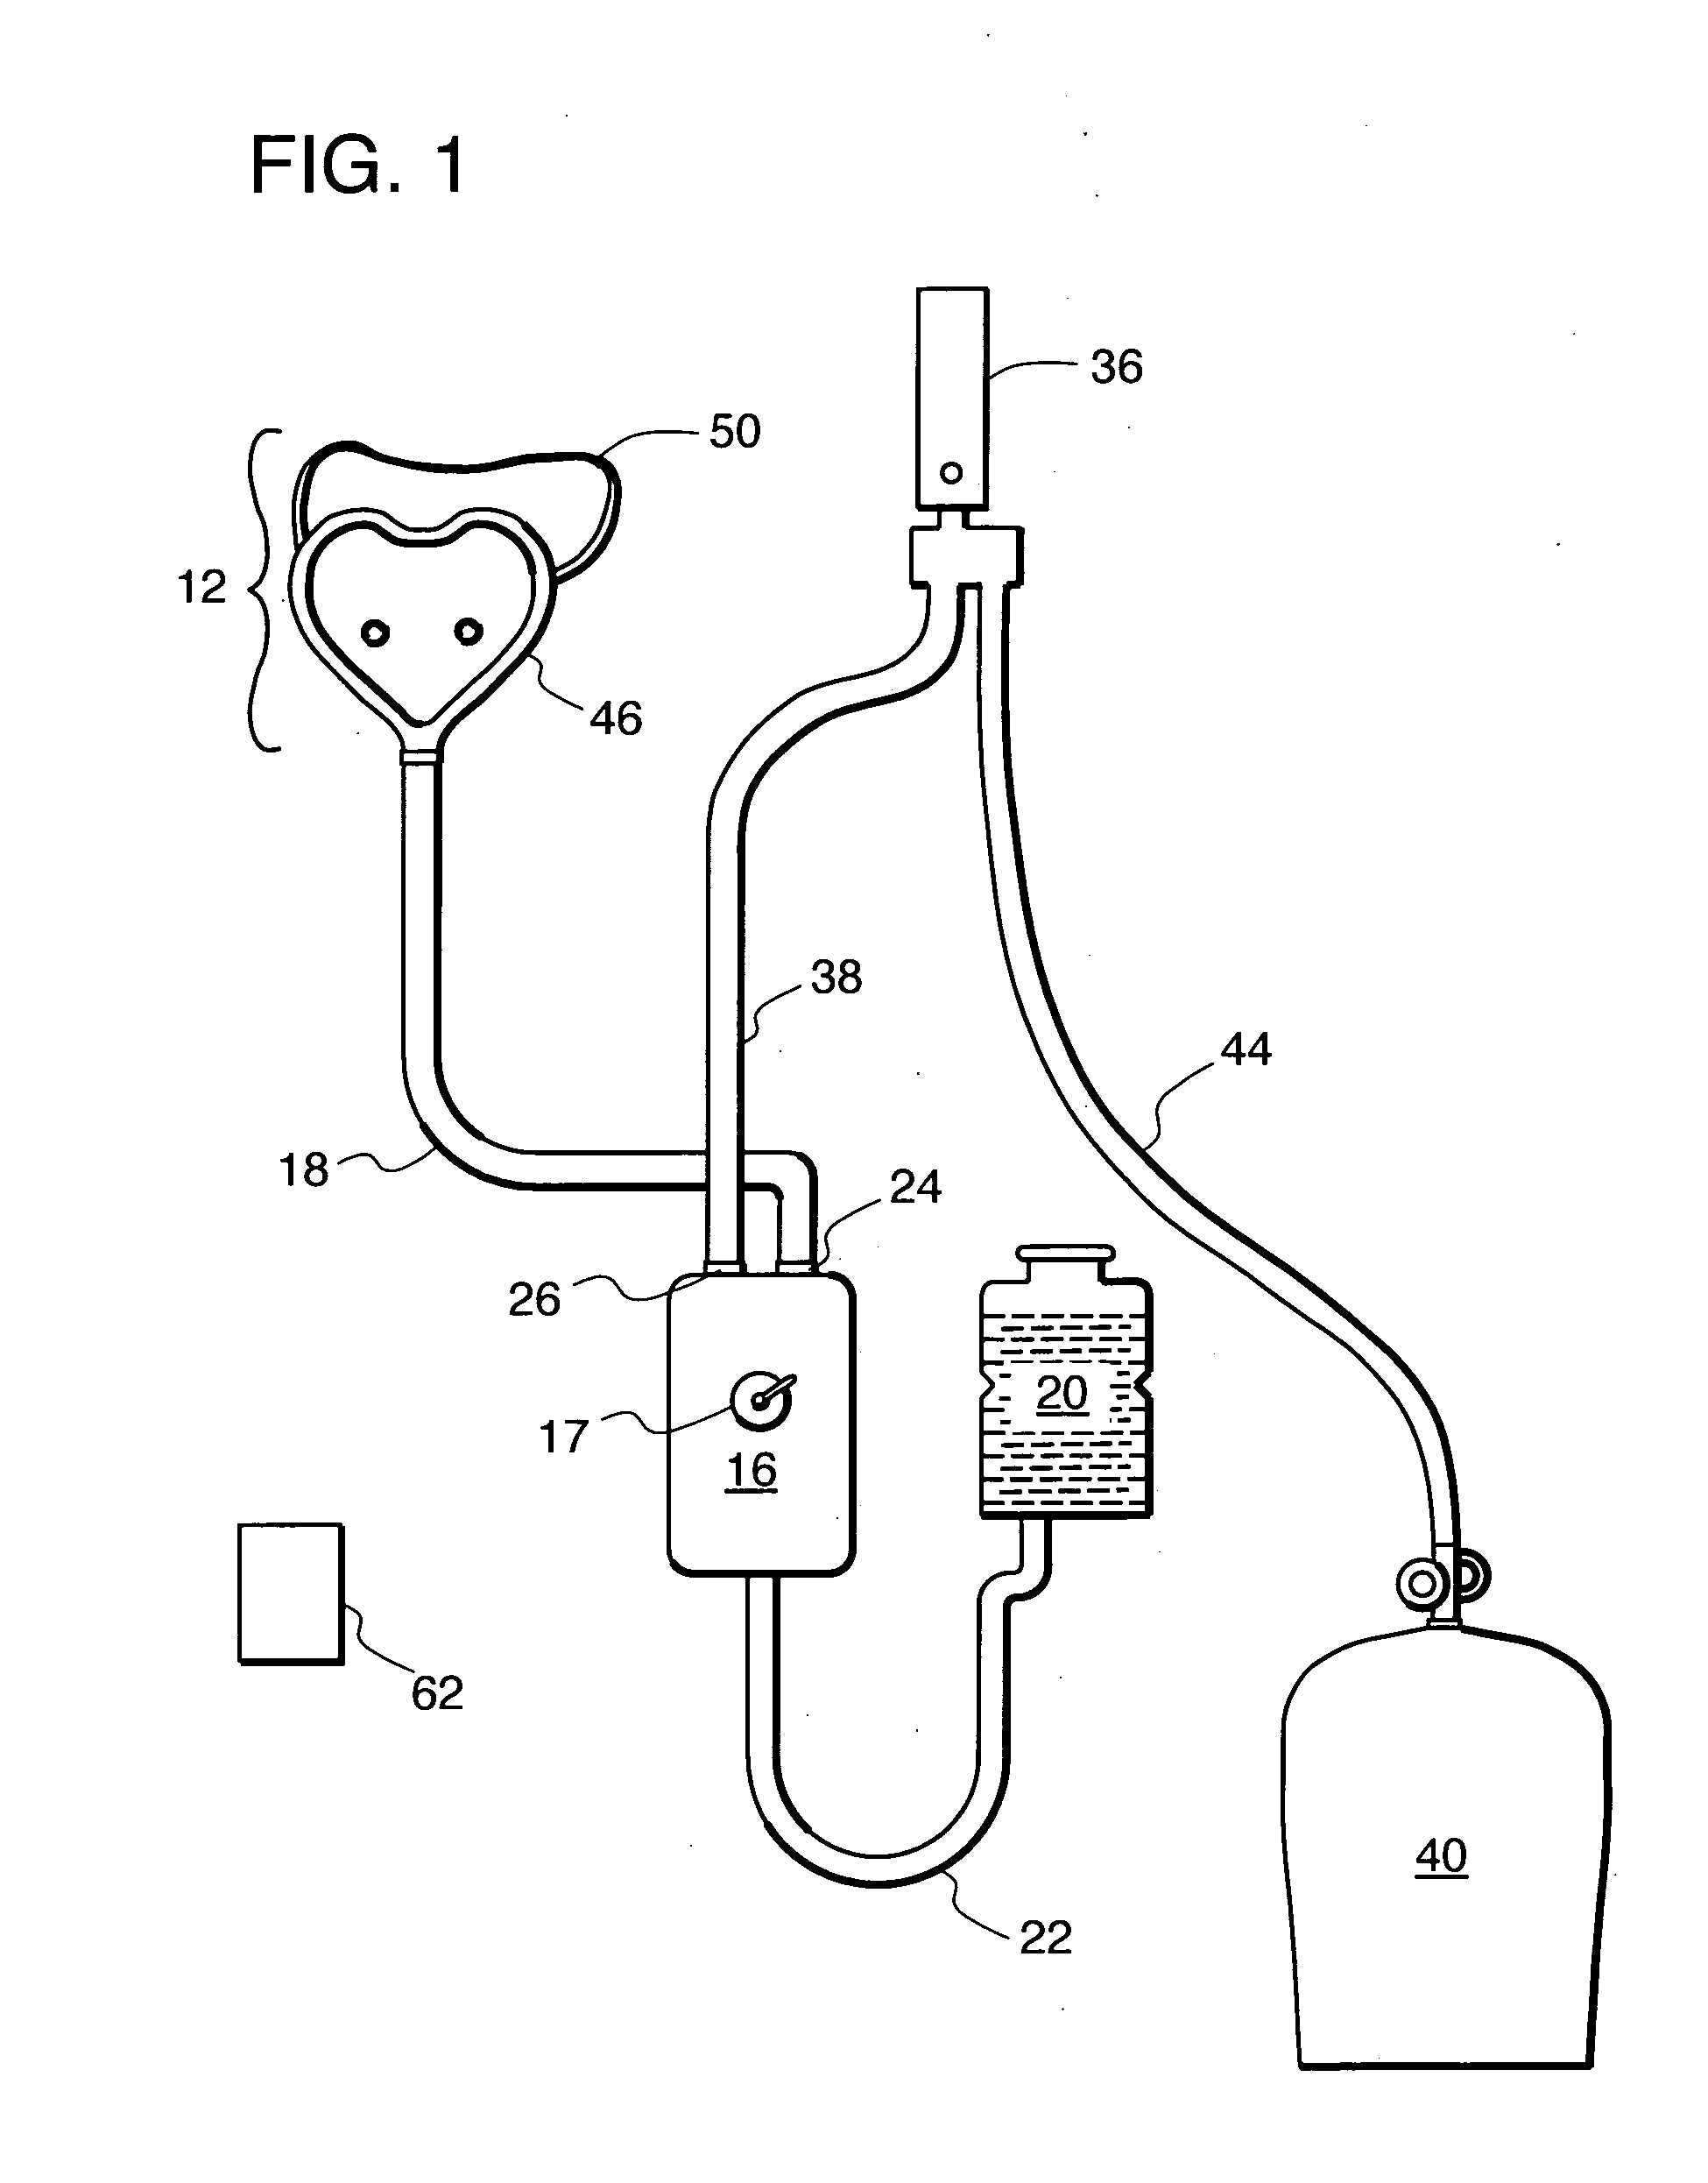 High-flow oxygen delivery system and methods of use thereof